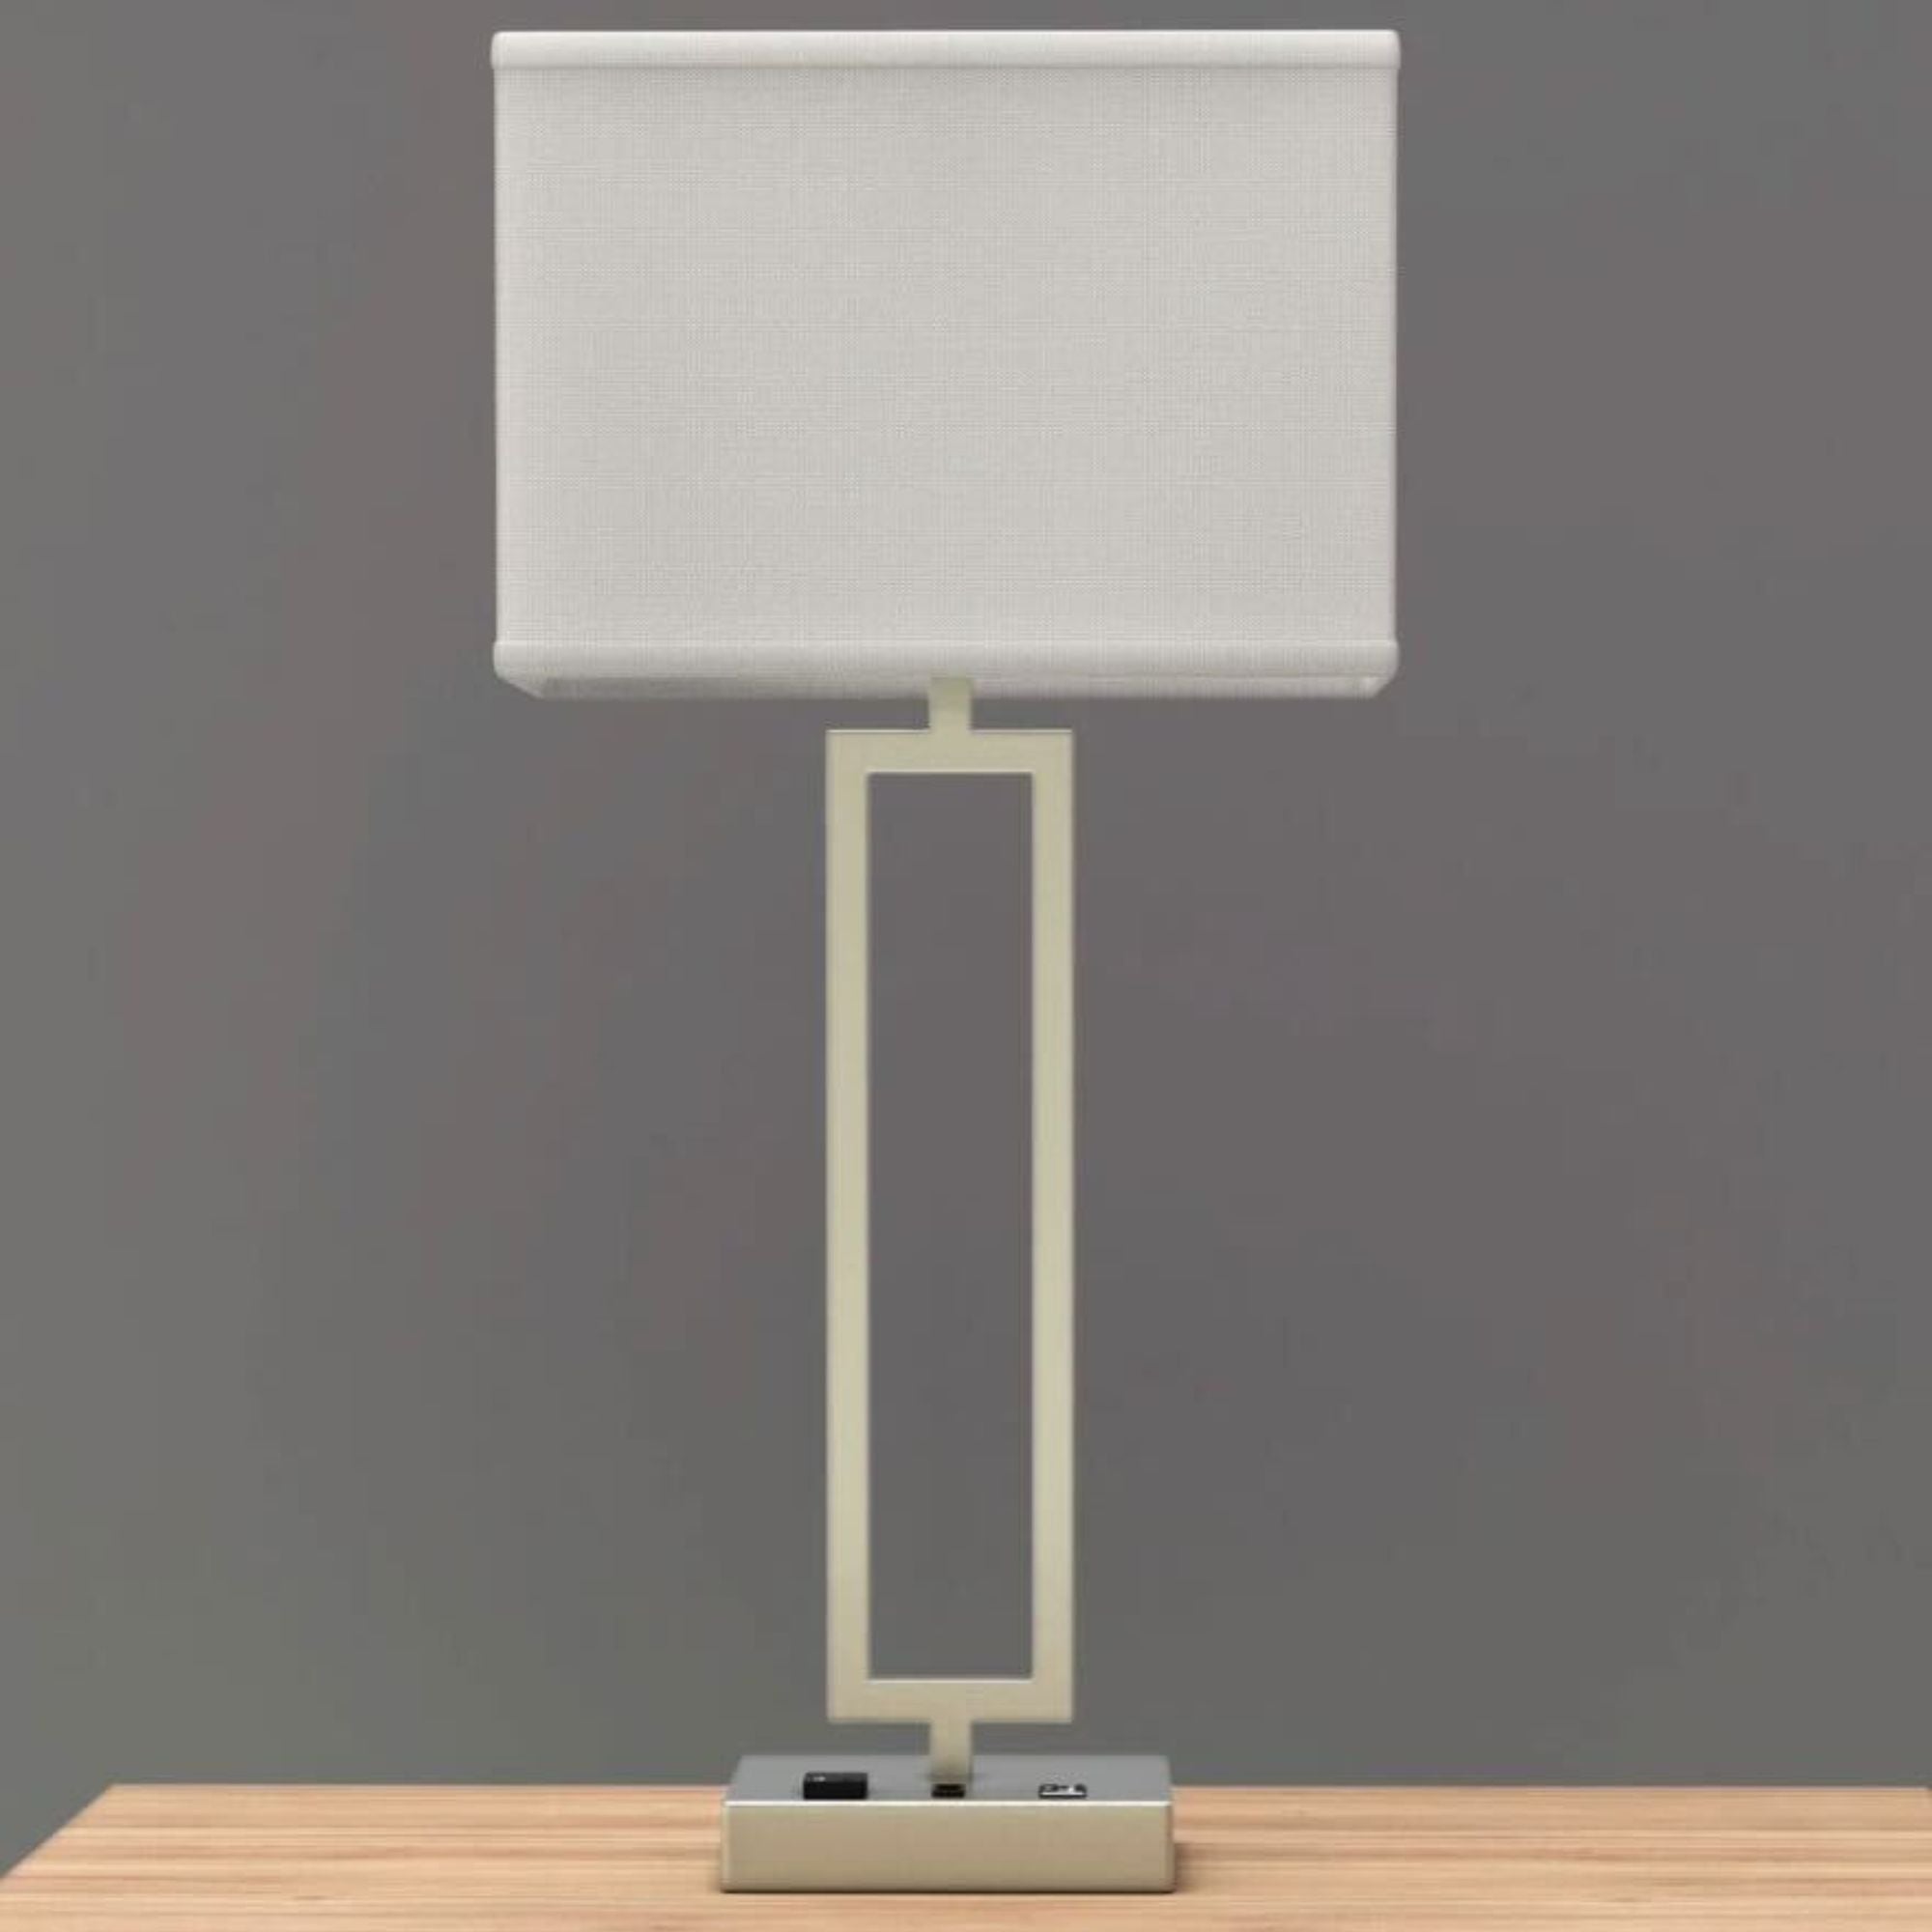 Modern Desk Lamp with 2 USB Ports & 2 Power Outlets